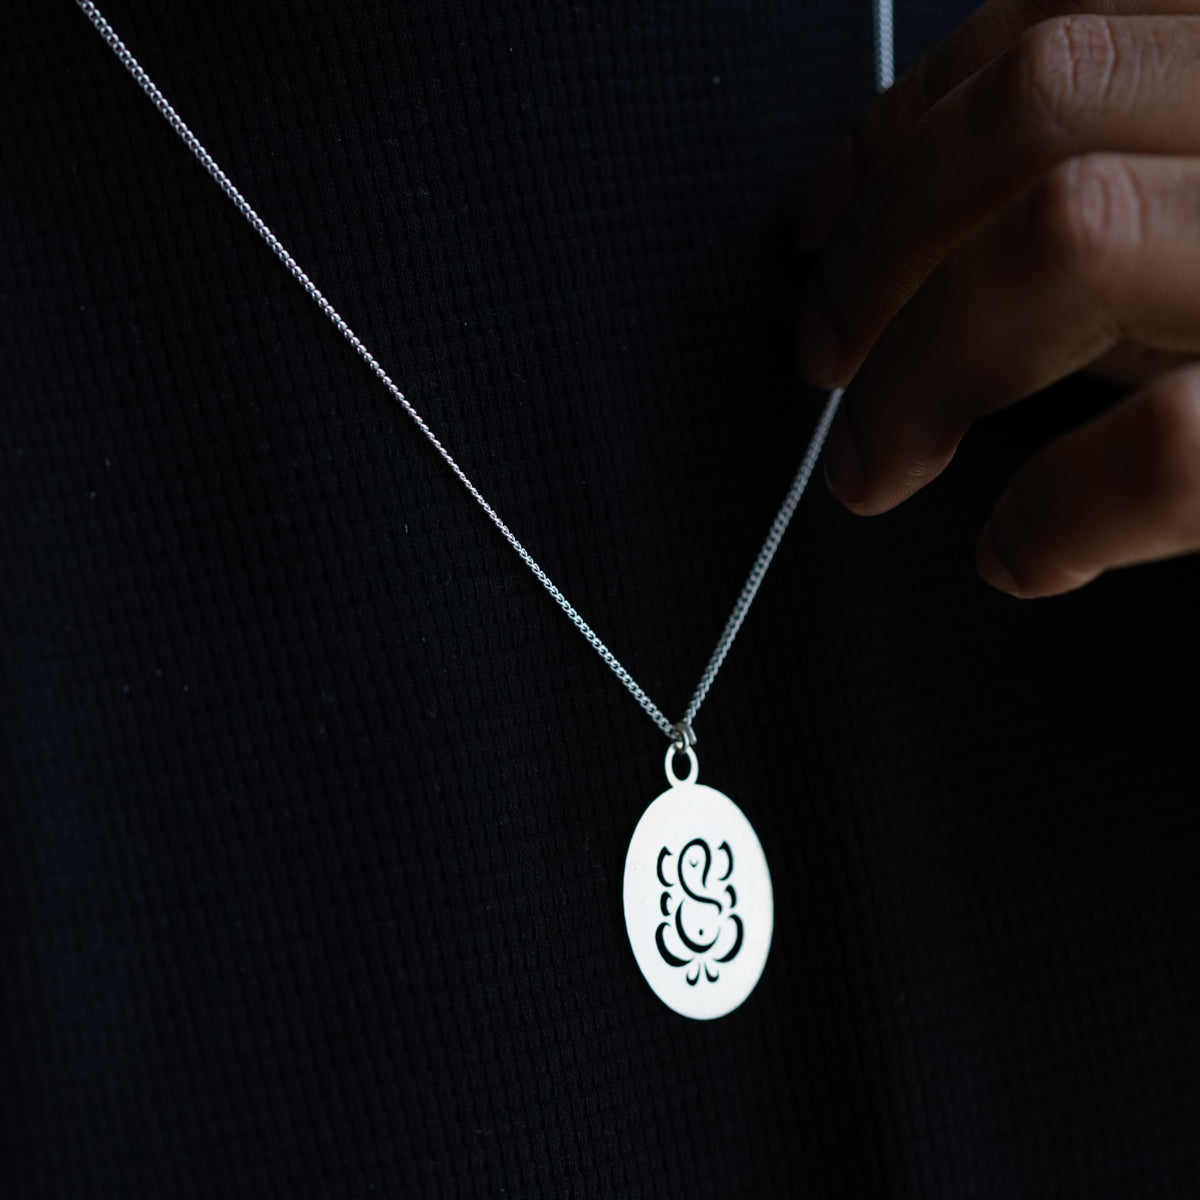 a person wearing a silver necklace with a white omen symbol on it